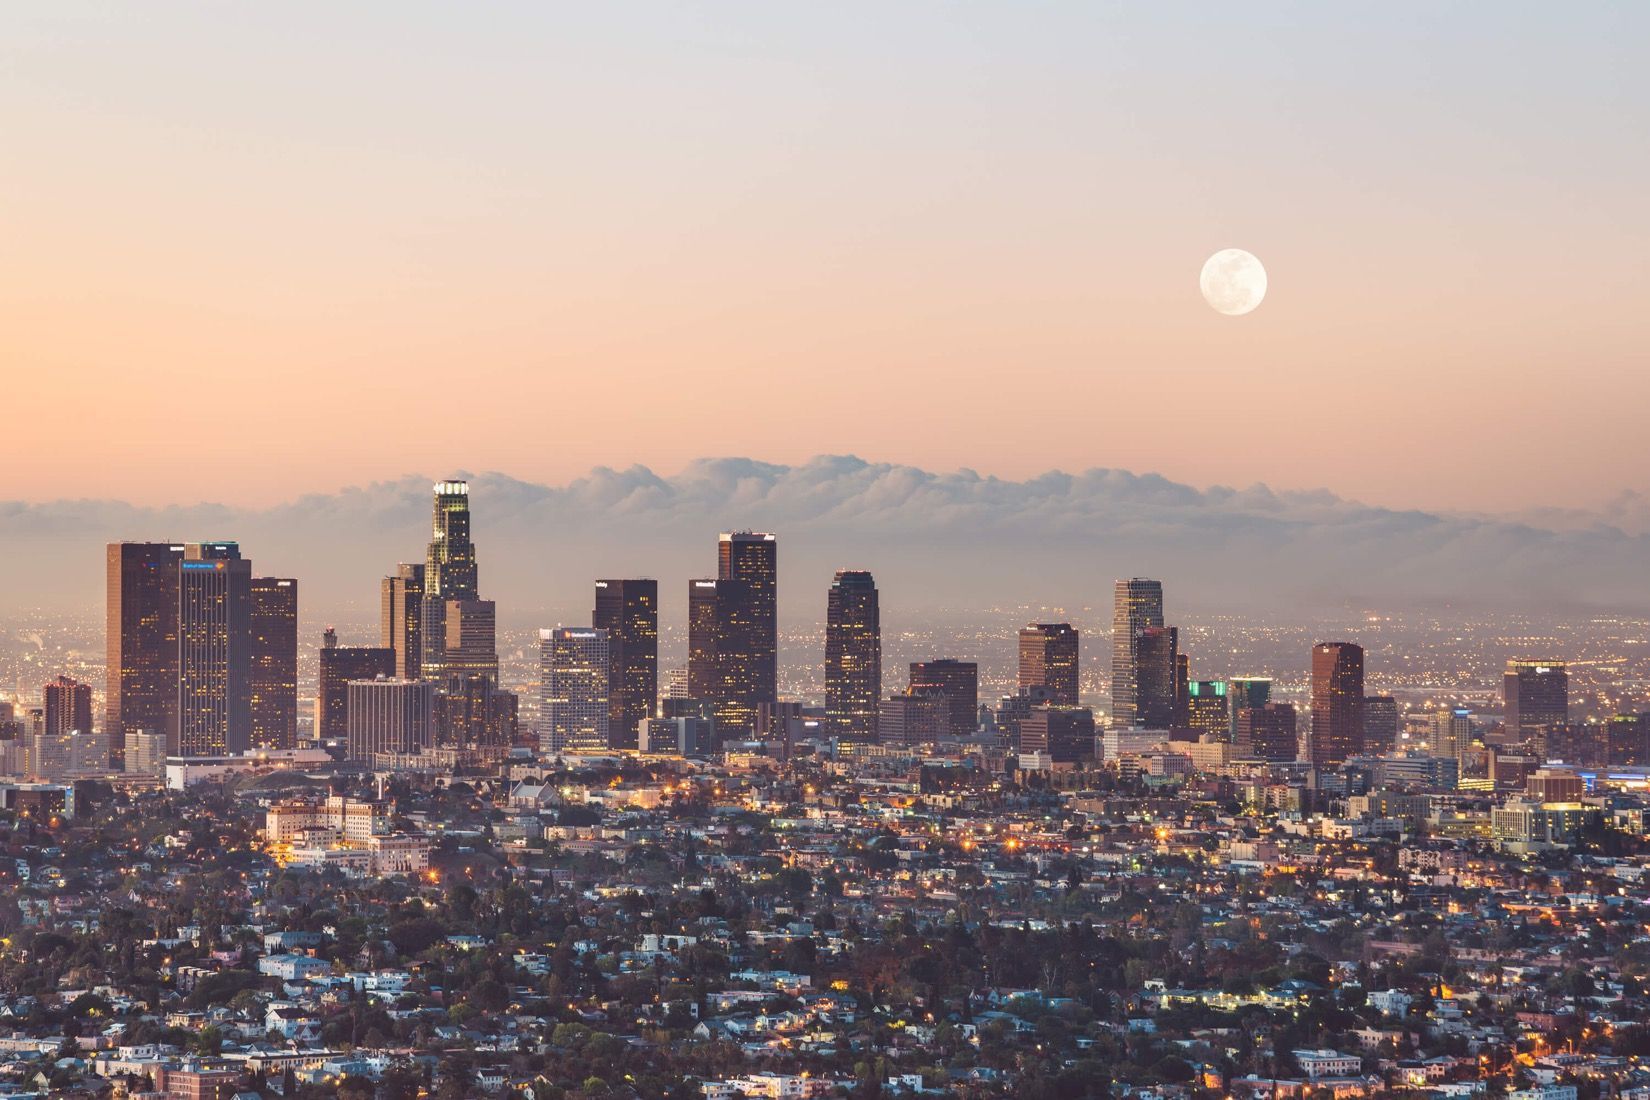 Our LA Skyline Wallpaper features bright lights and skyscrapers with the the moon and the bre. Los angeles skyline, Los angeles photography, Los angeles wallpaper